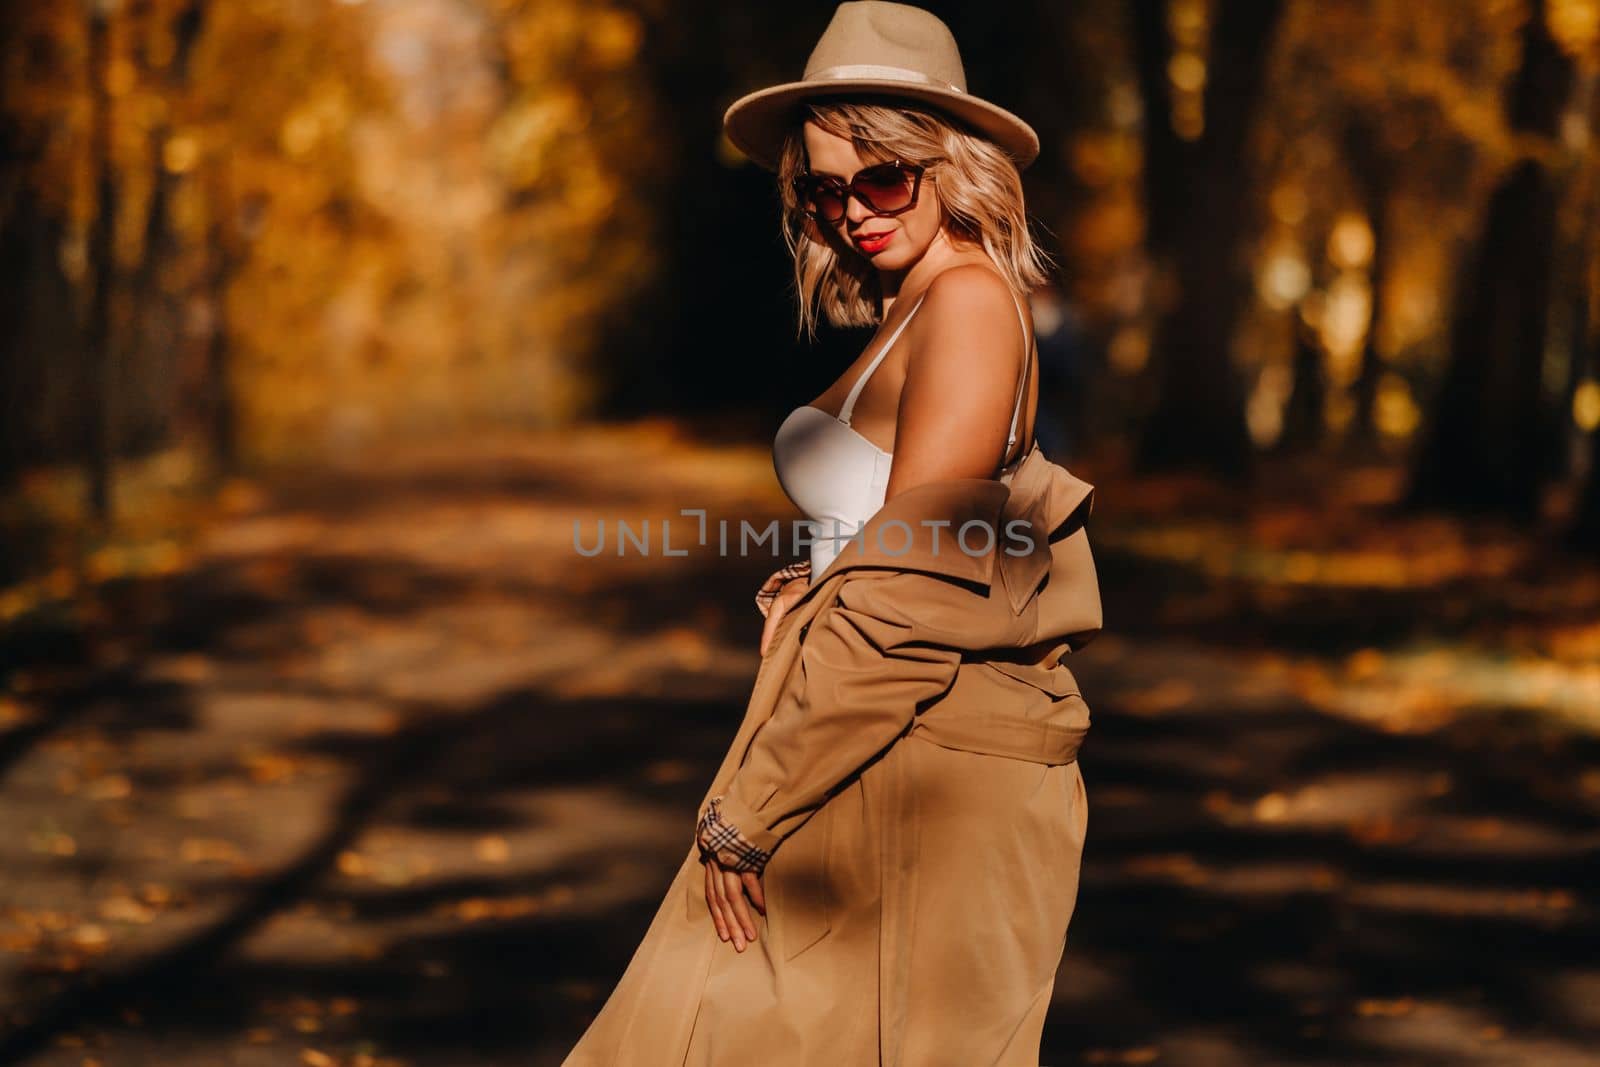 Sexy girl in a coat and hat in an autumn sunny park.